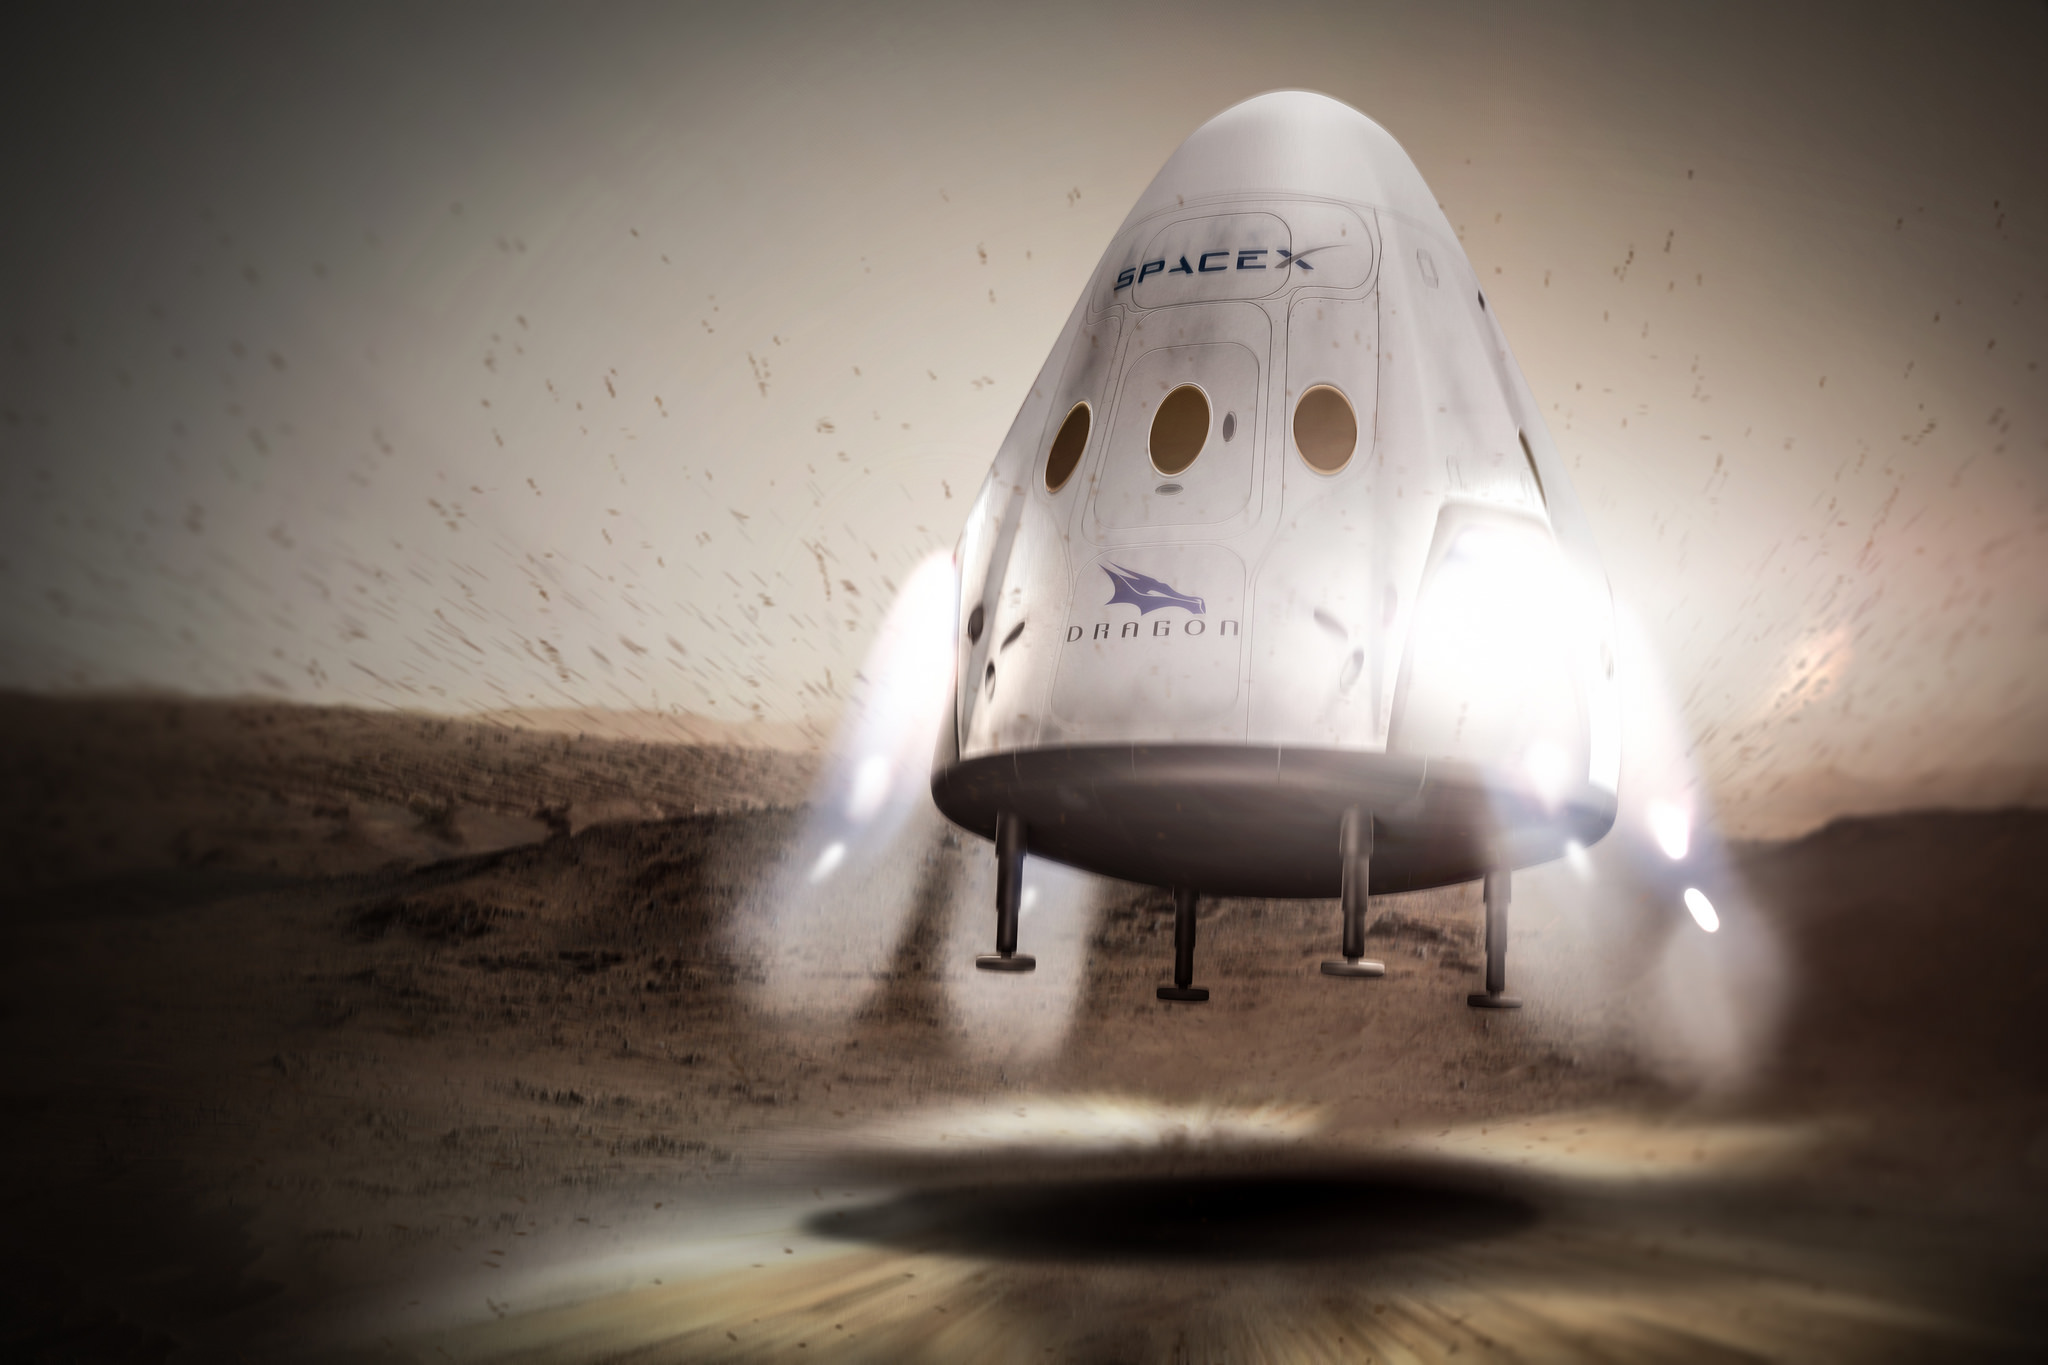 SpaceX Will Launch Private Mars Missions as Soon as 2018